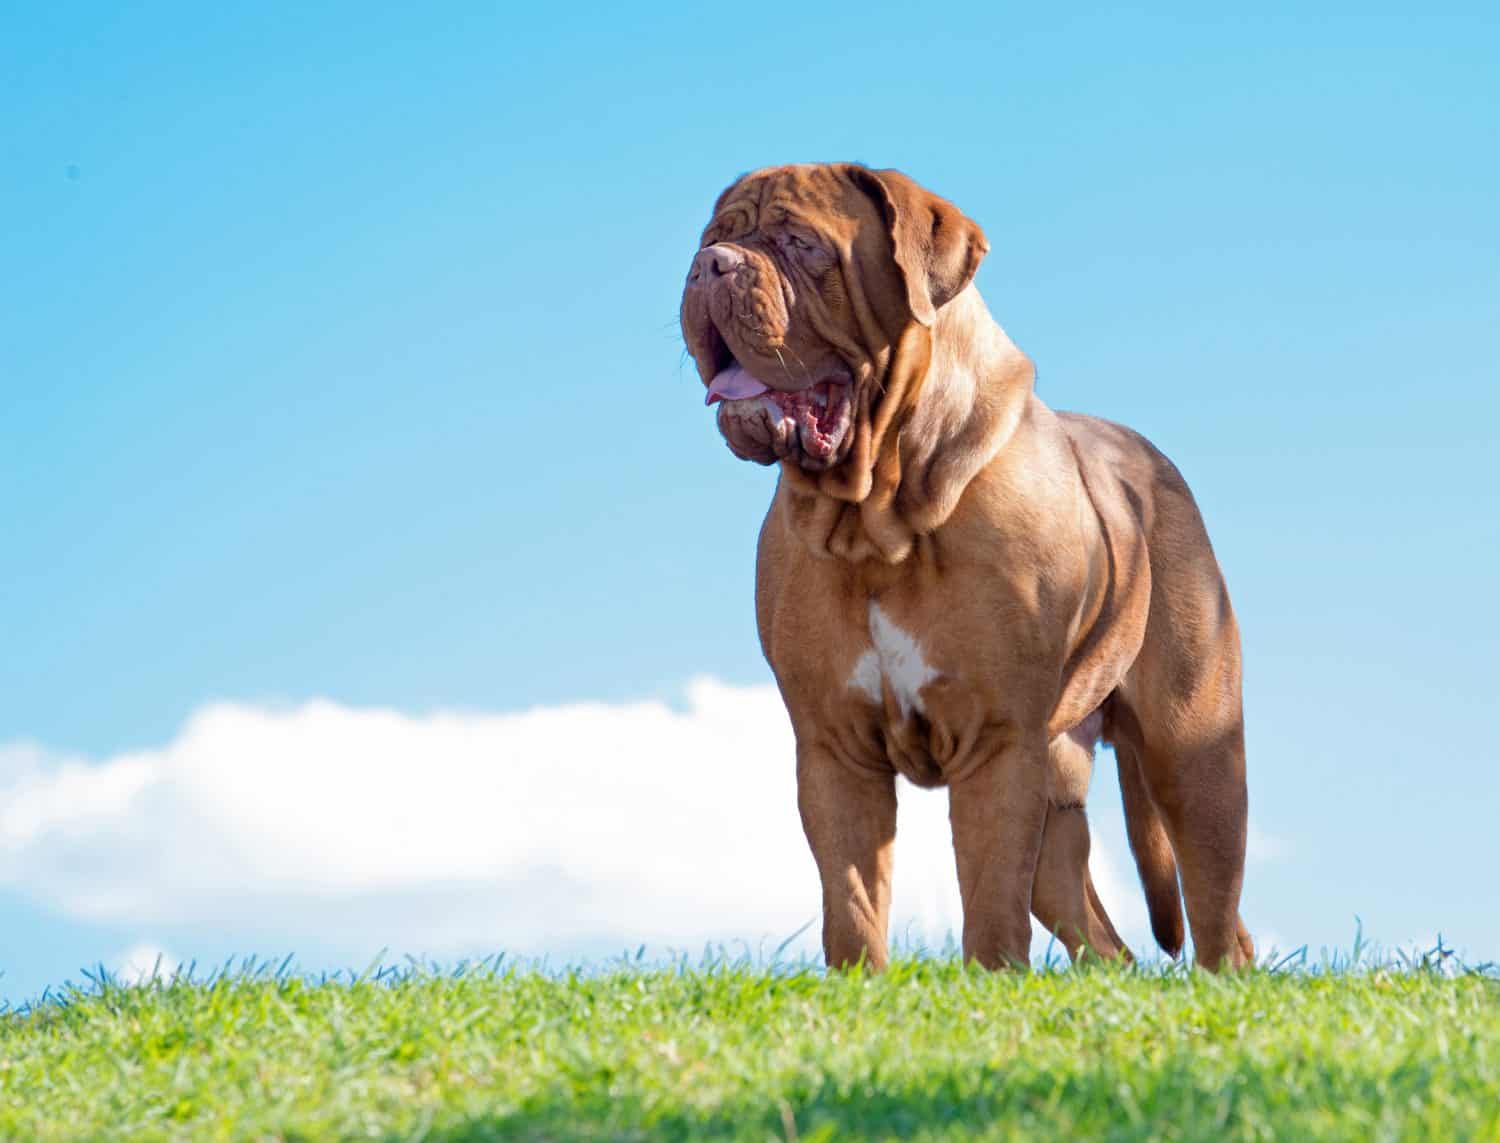 Dogue de Bordeaux dog, standing outdoors with sky background